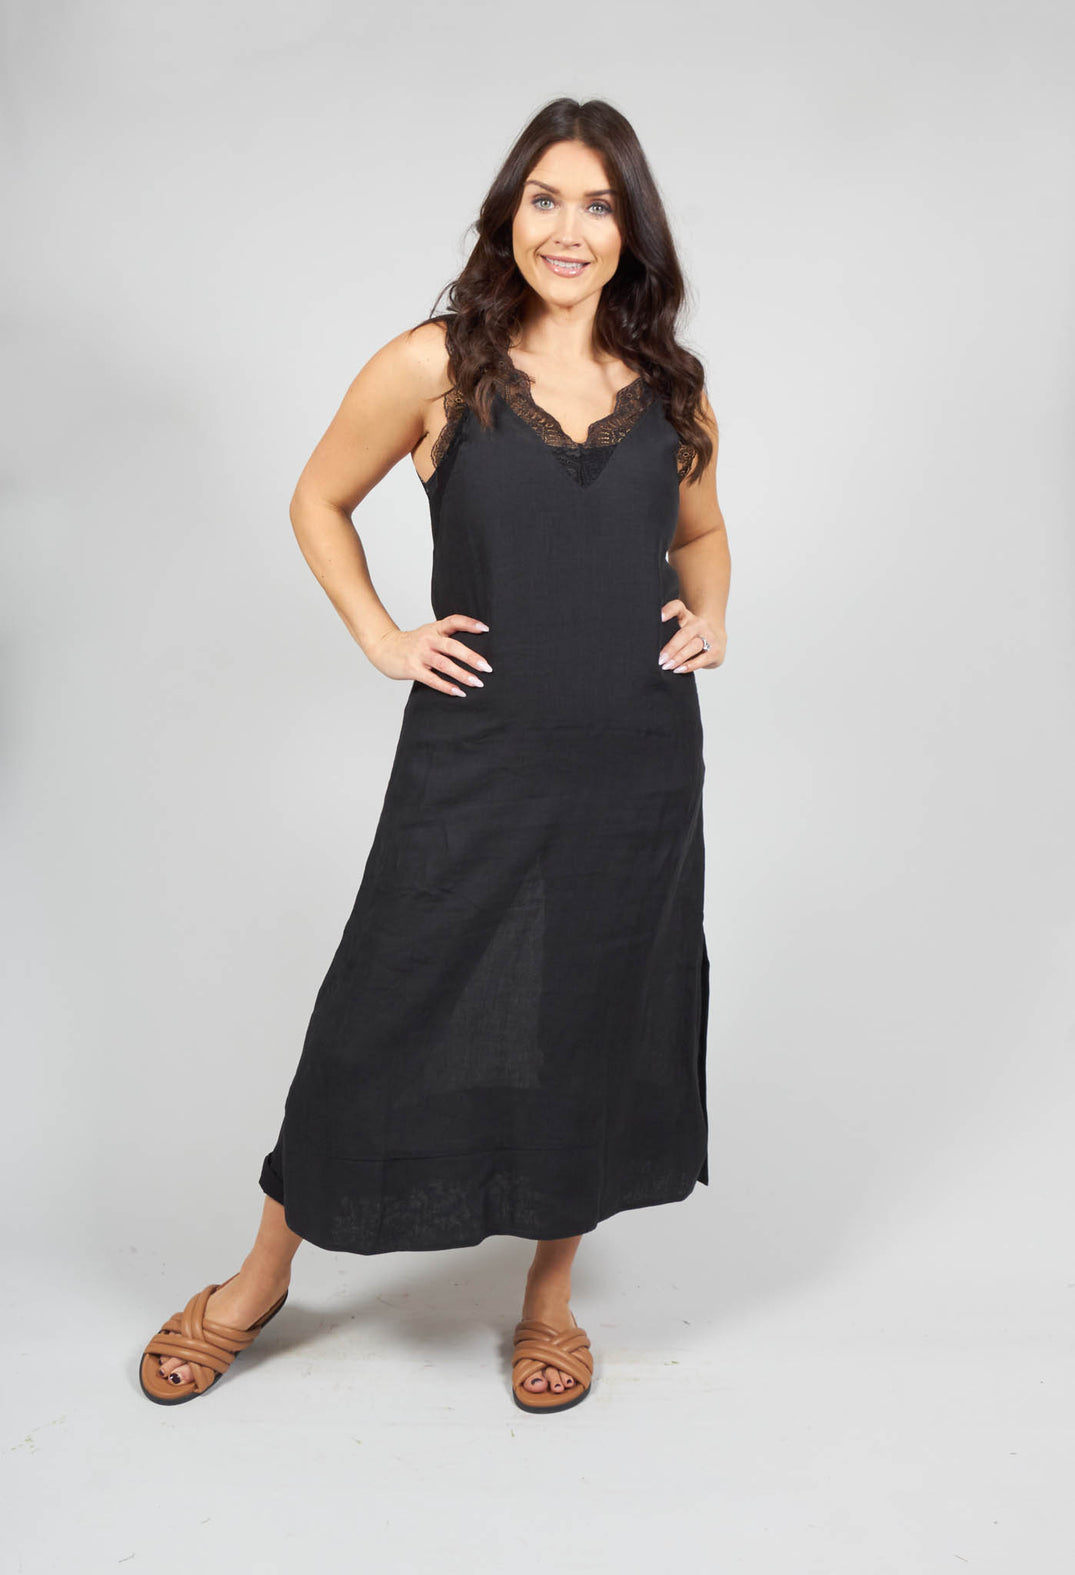 lady smiling and wearing a midi dress with lace detail in black